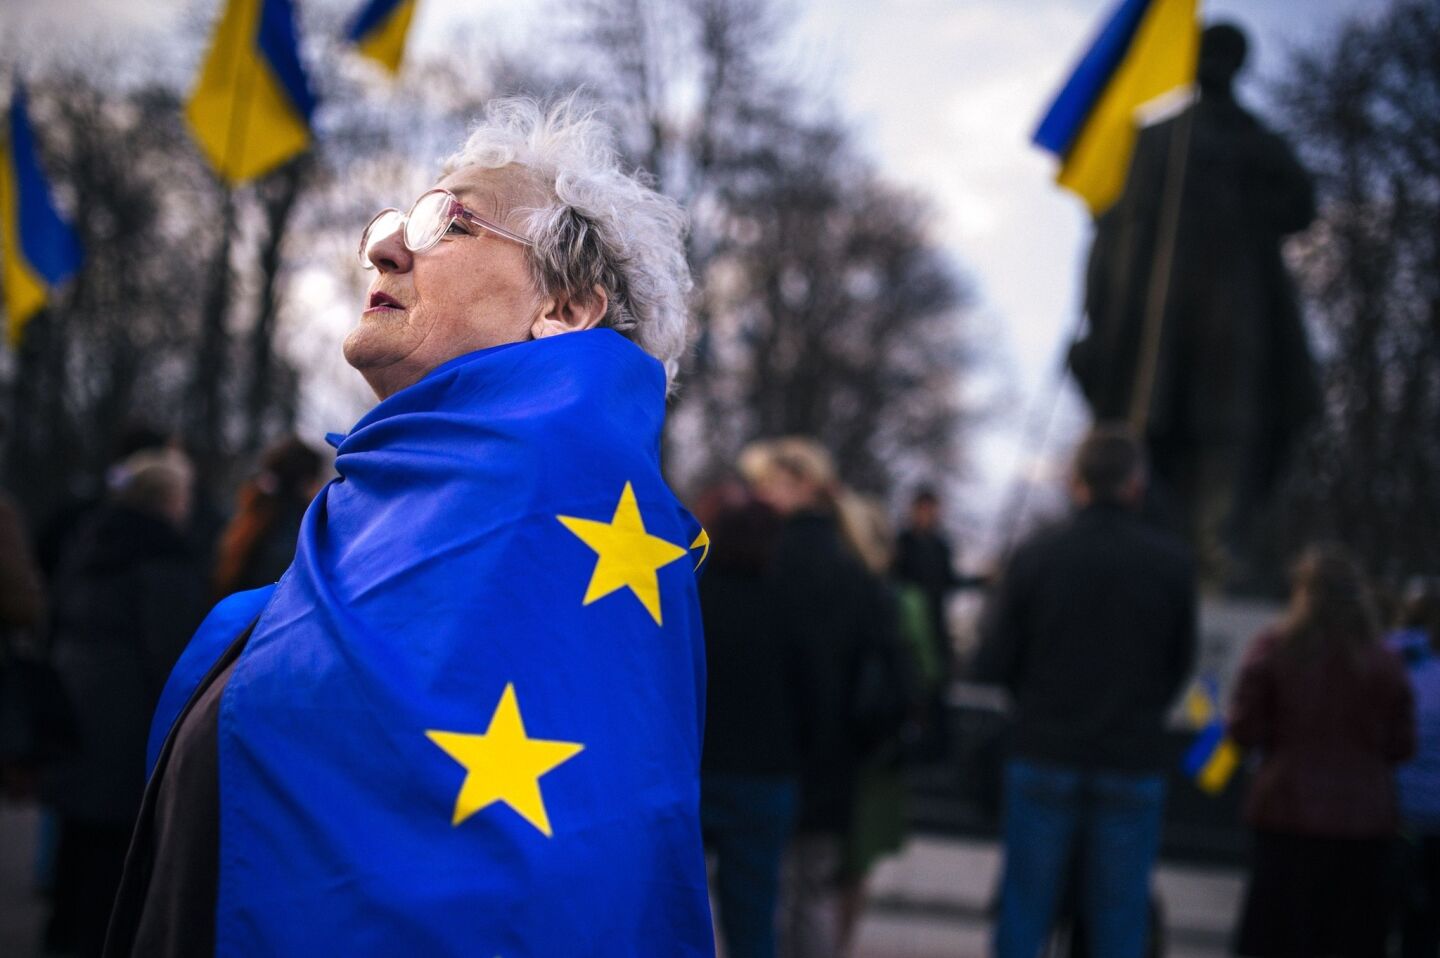 A woman wrapped in a European Union flag attends a pro-Ukraine rally in the eastern Ukrainian city of Lugansk.